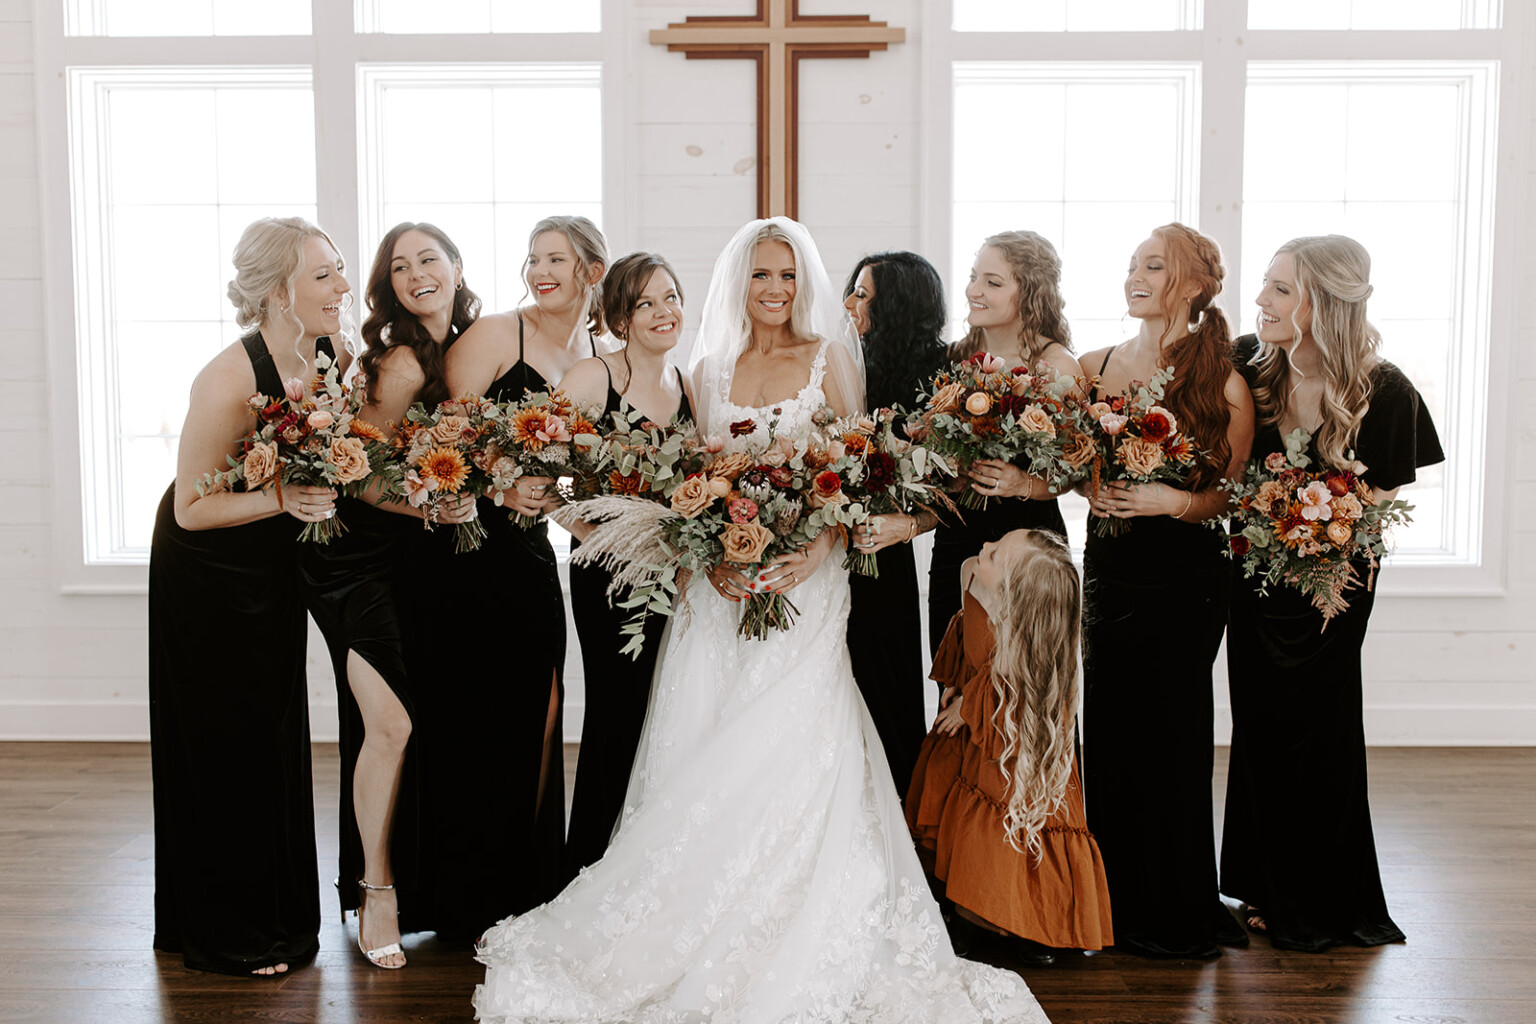 Chapel Destination Wedding In Tennessee With Thoughtful Details 14 1536x1024 